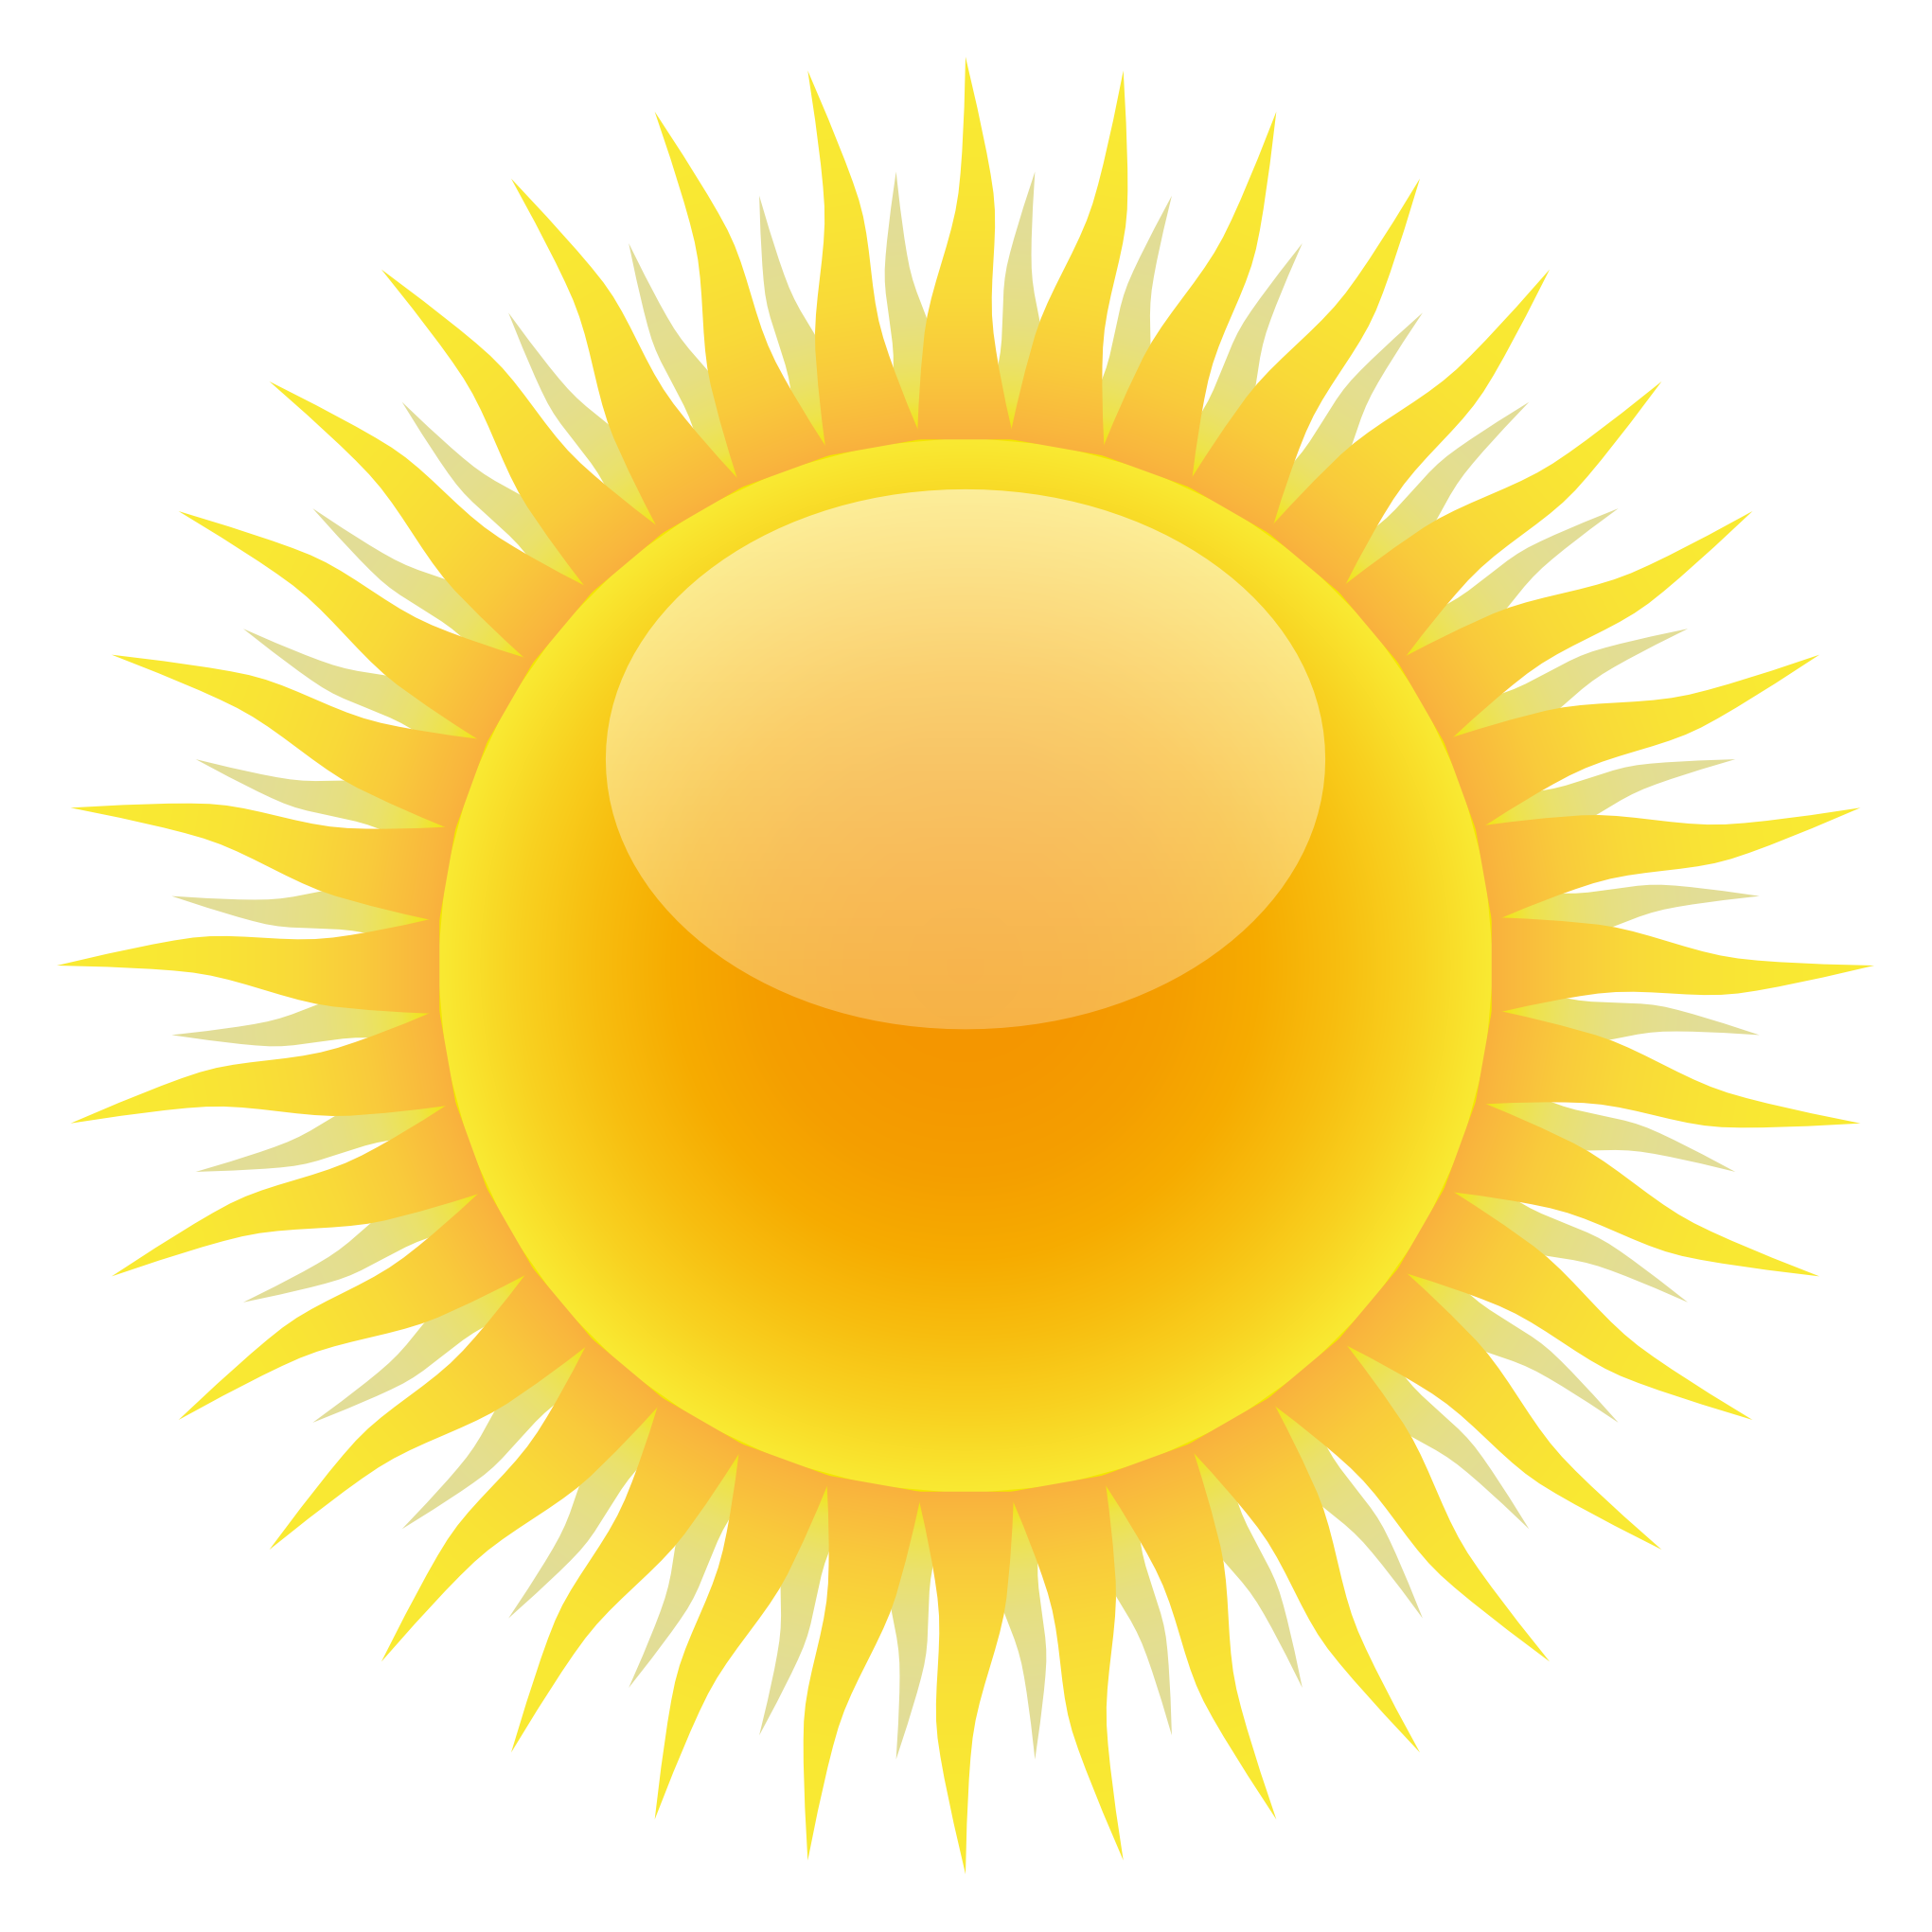 Download Sun PNG Image for Free